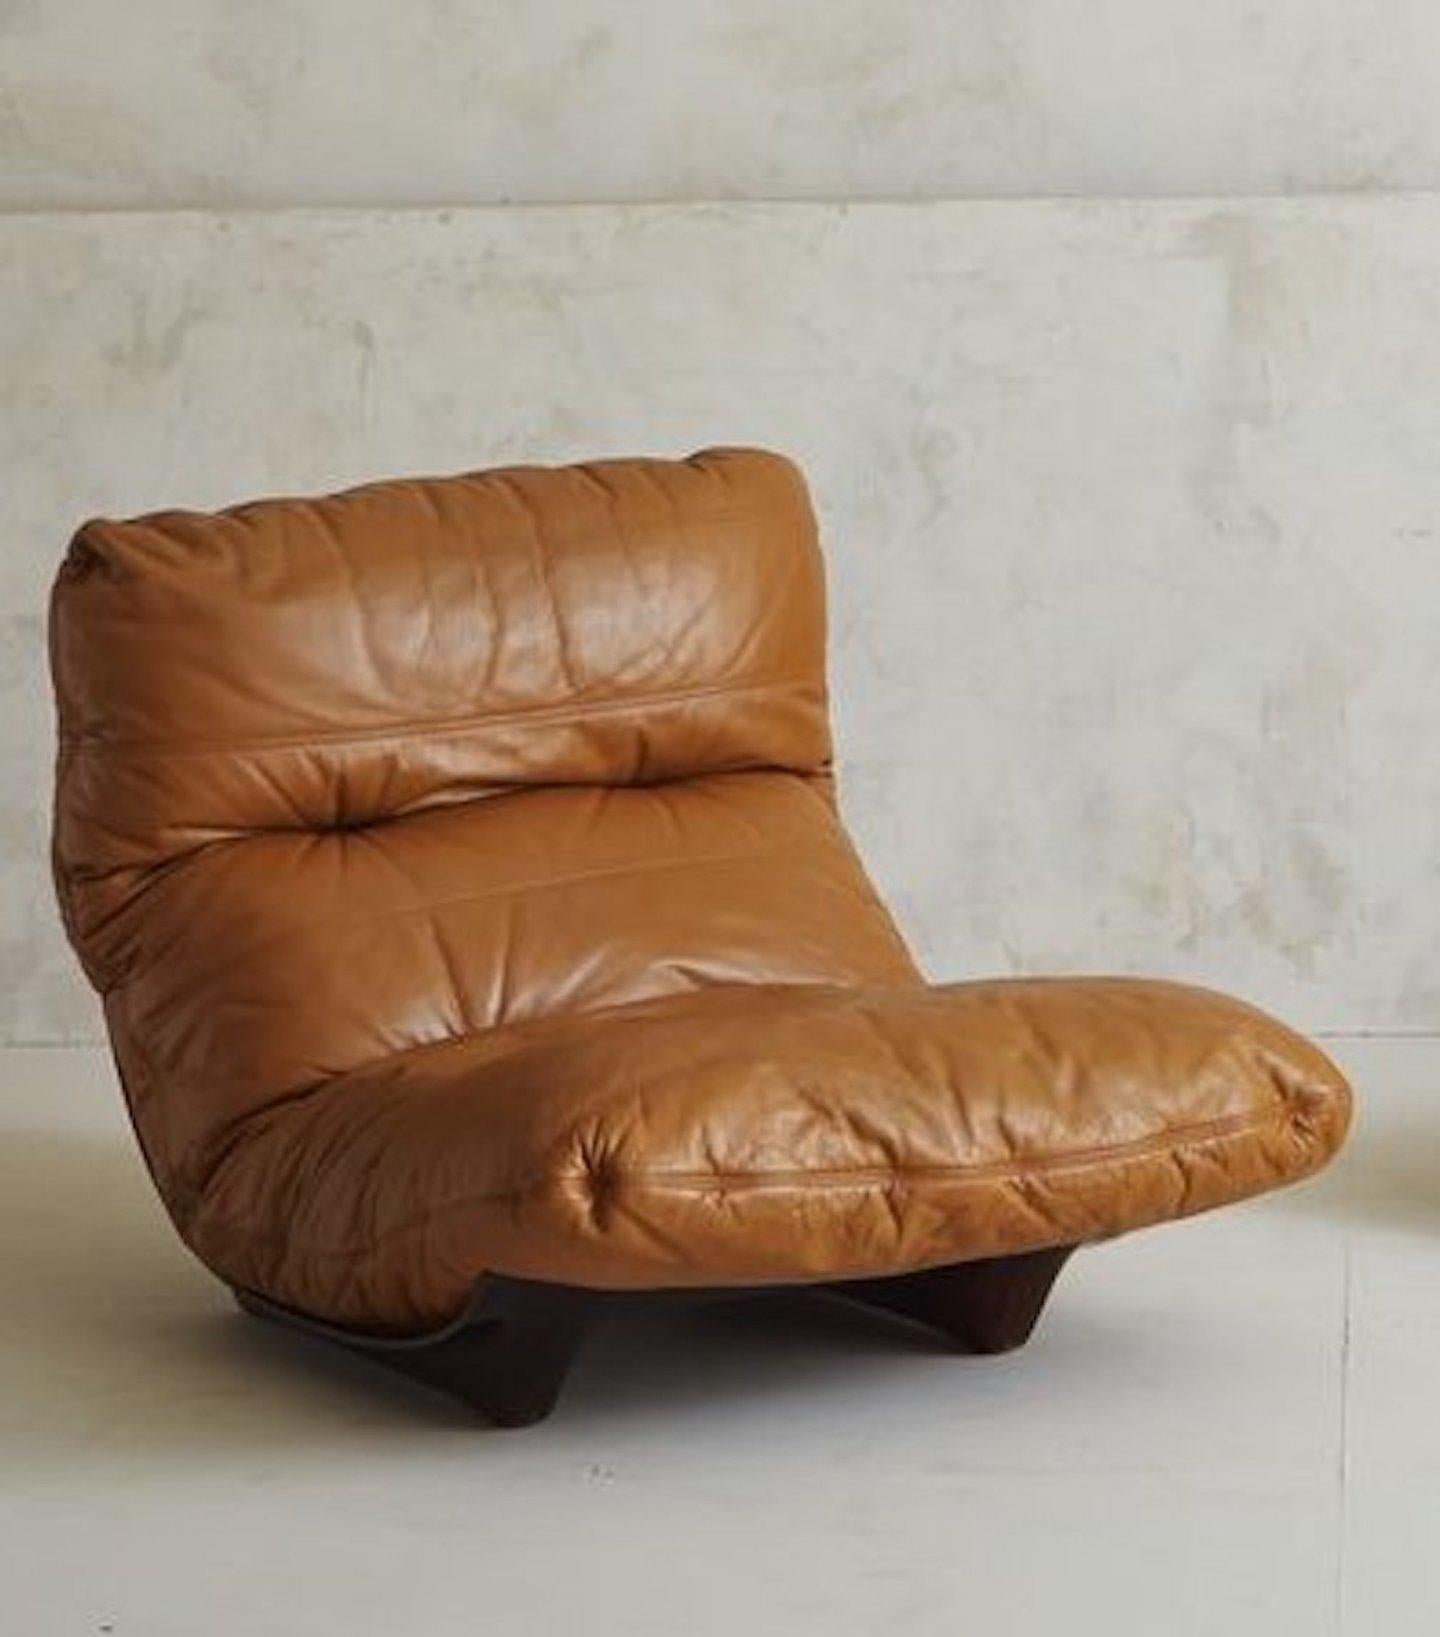 Designed by Michel Ducaroy for Lignet Roset, the Marsala chair features a sculptural amber plexiglass frame that is entirely curved. This Marsala chair has a gorgeous cognac leather upholstery. Priced individually, one available.